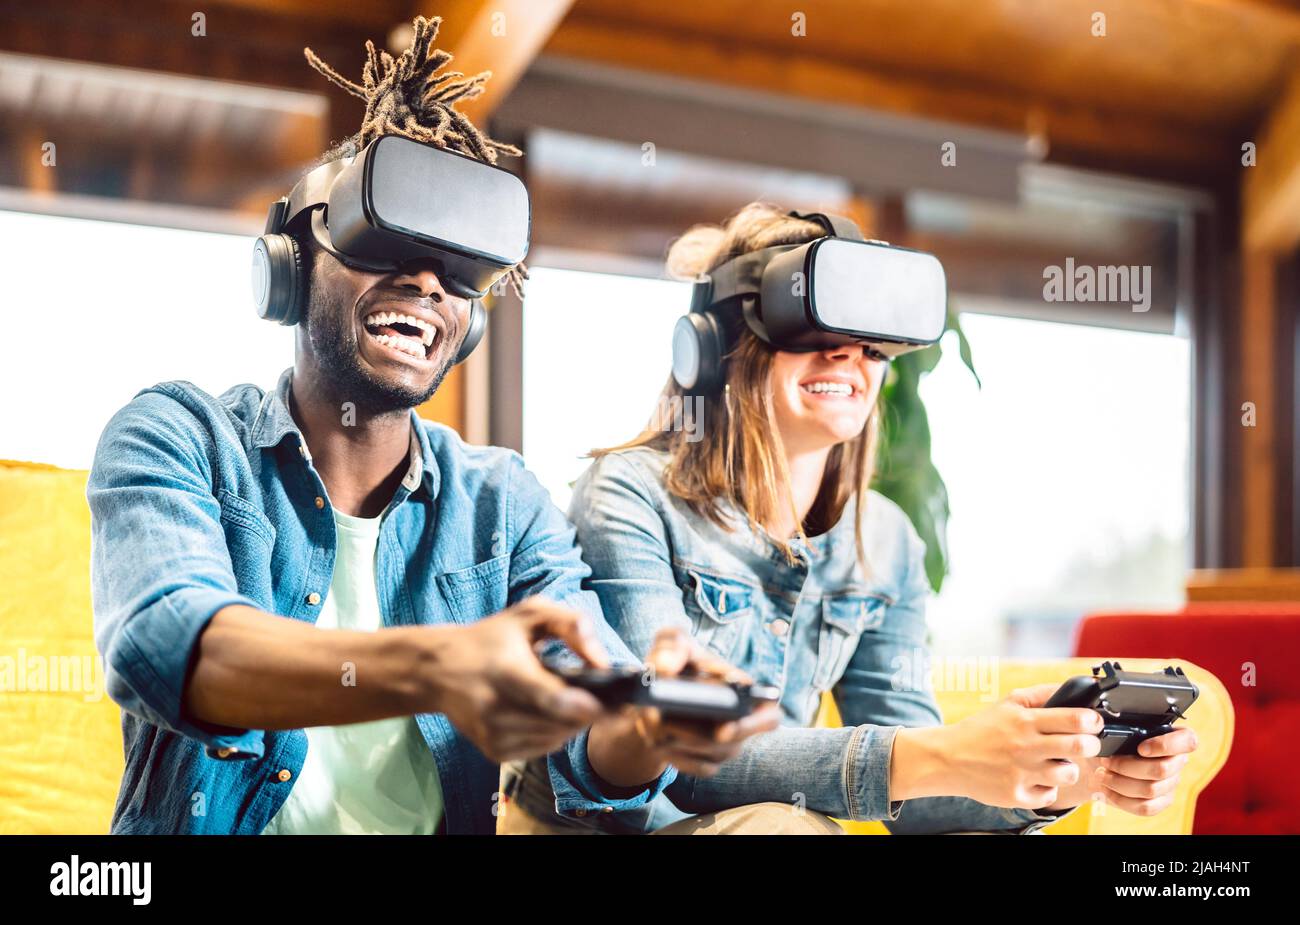 Millenial couple playing with vr glasses at home couch - Virtual reality and tech concept with enthusiastic friends having fun on headset goggles Stock Photo